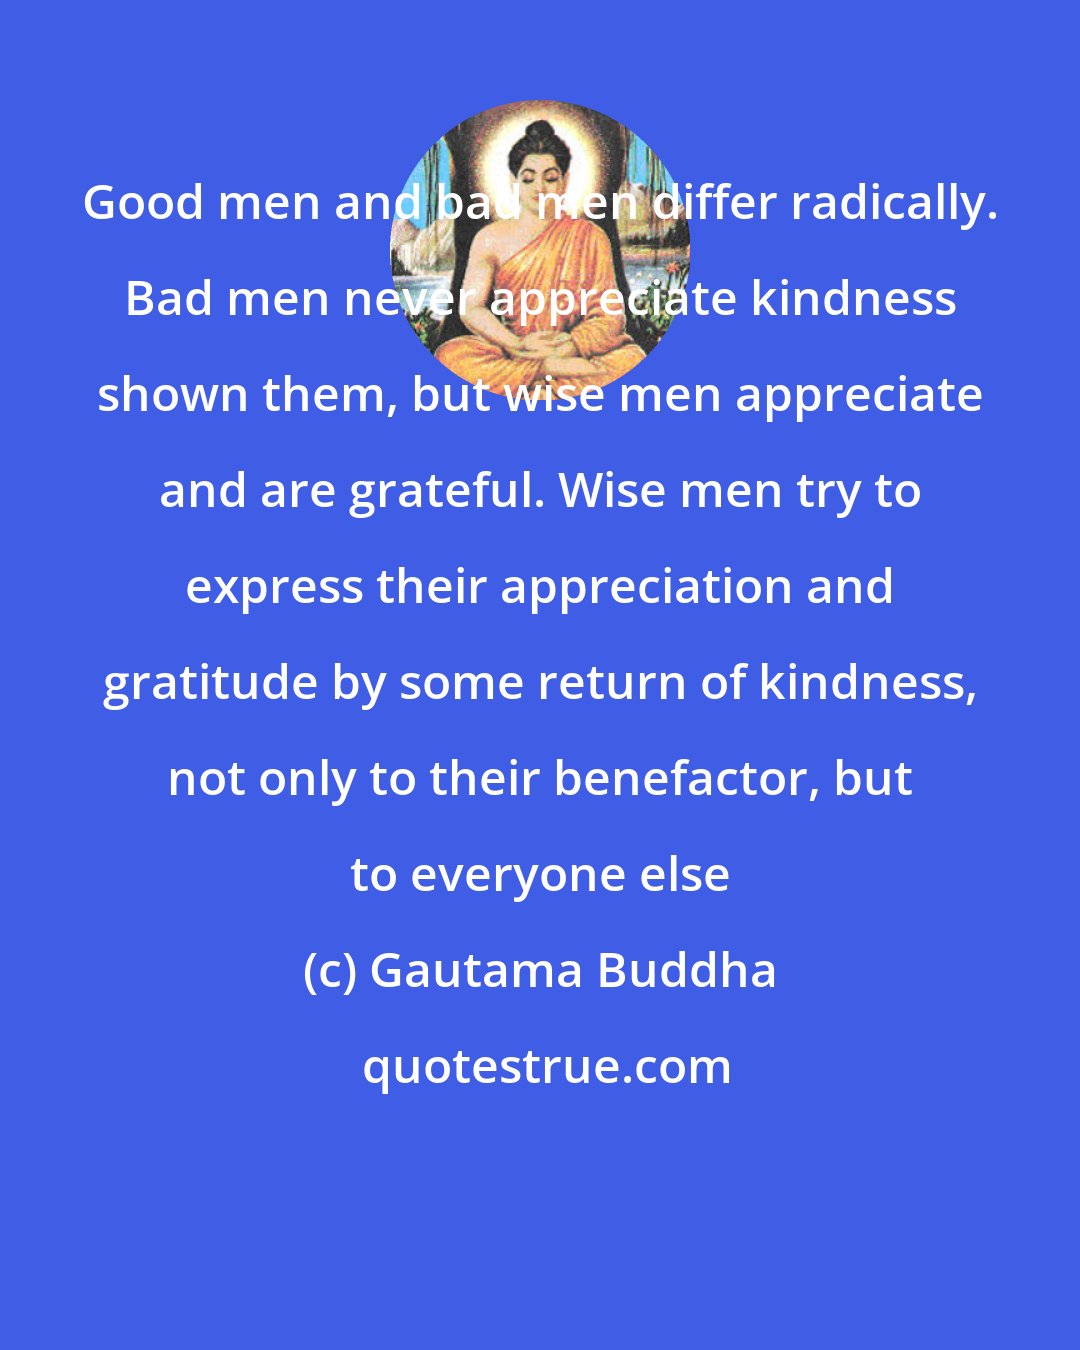 Gautama Buddha: Good men and bad men differ radically. Bad men never appreciate kindness shown them, but wise men appreciate and are grateful. Wise men try to express their appreciation and gratitude by some return of kindness, not only to their benefactor, but to everyone else